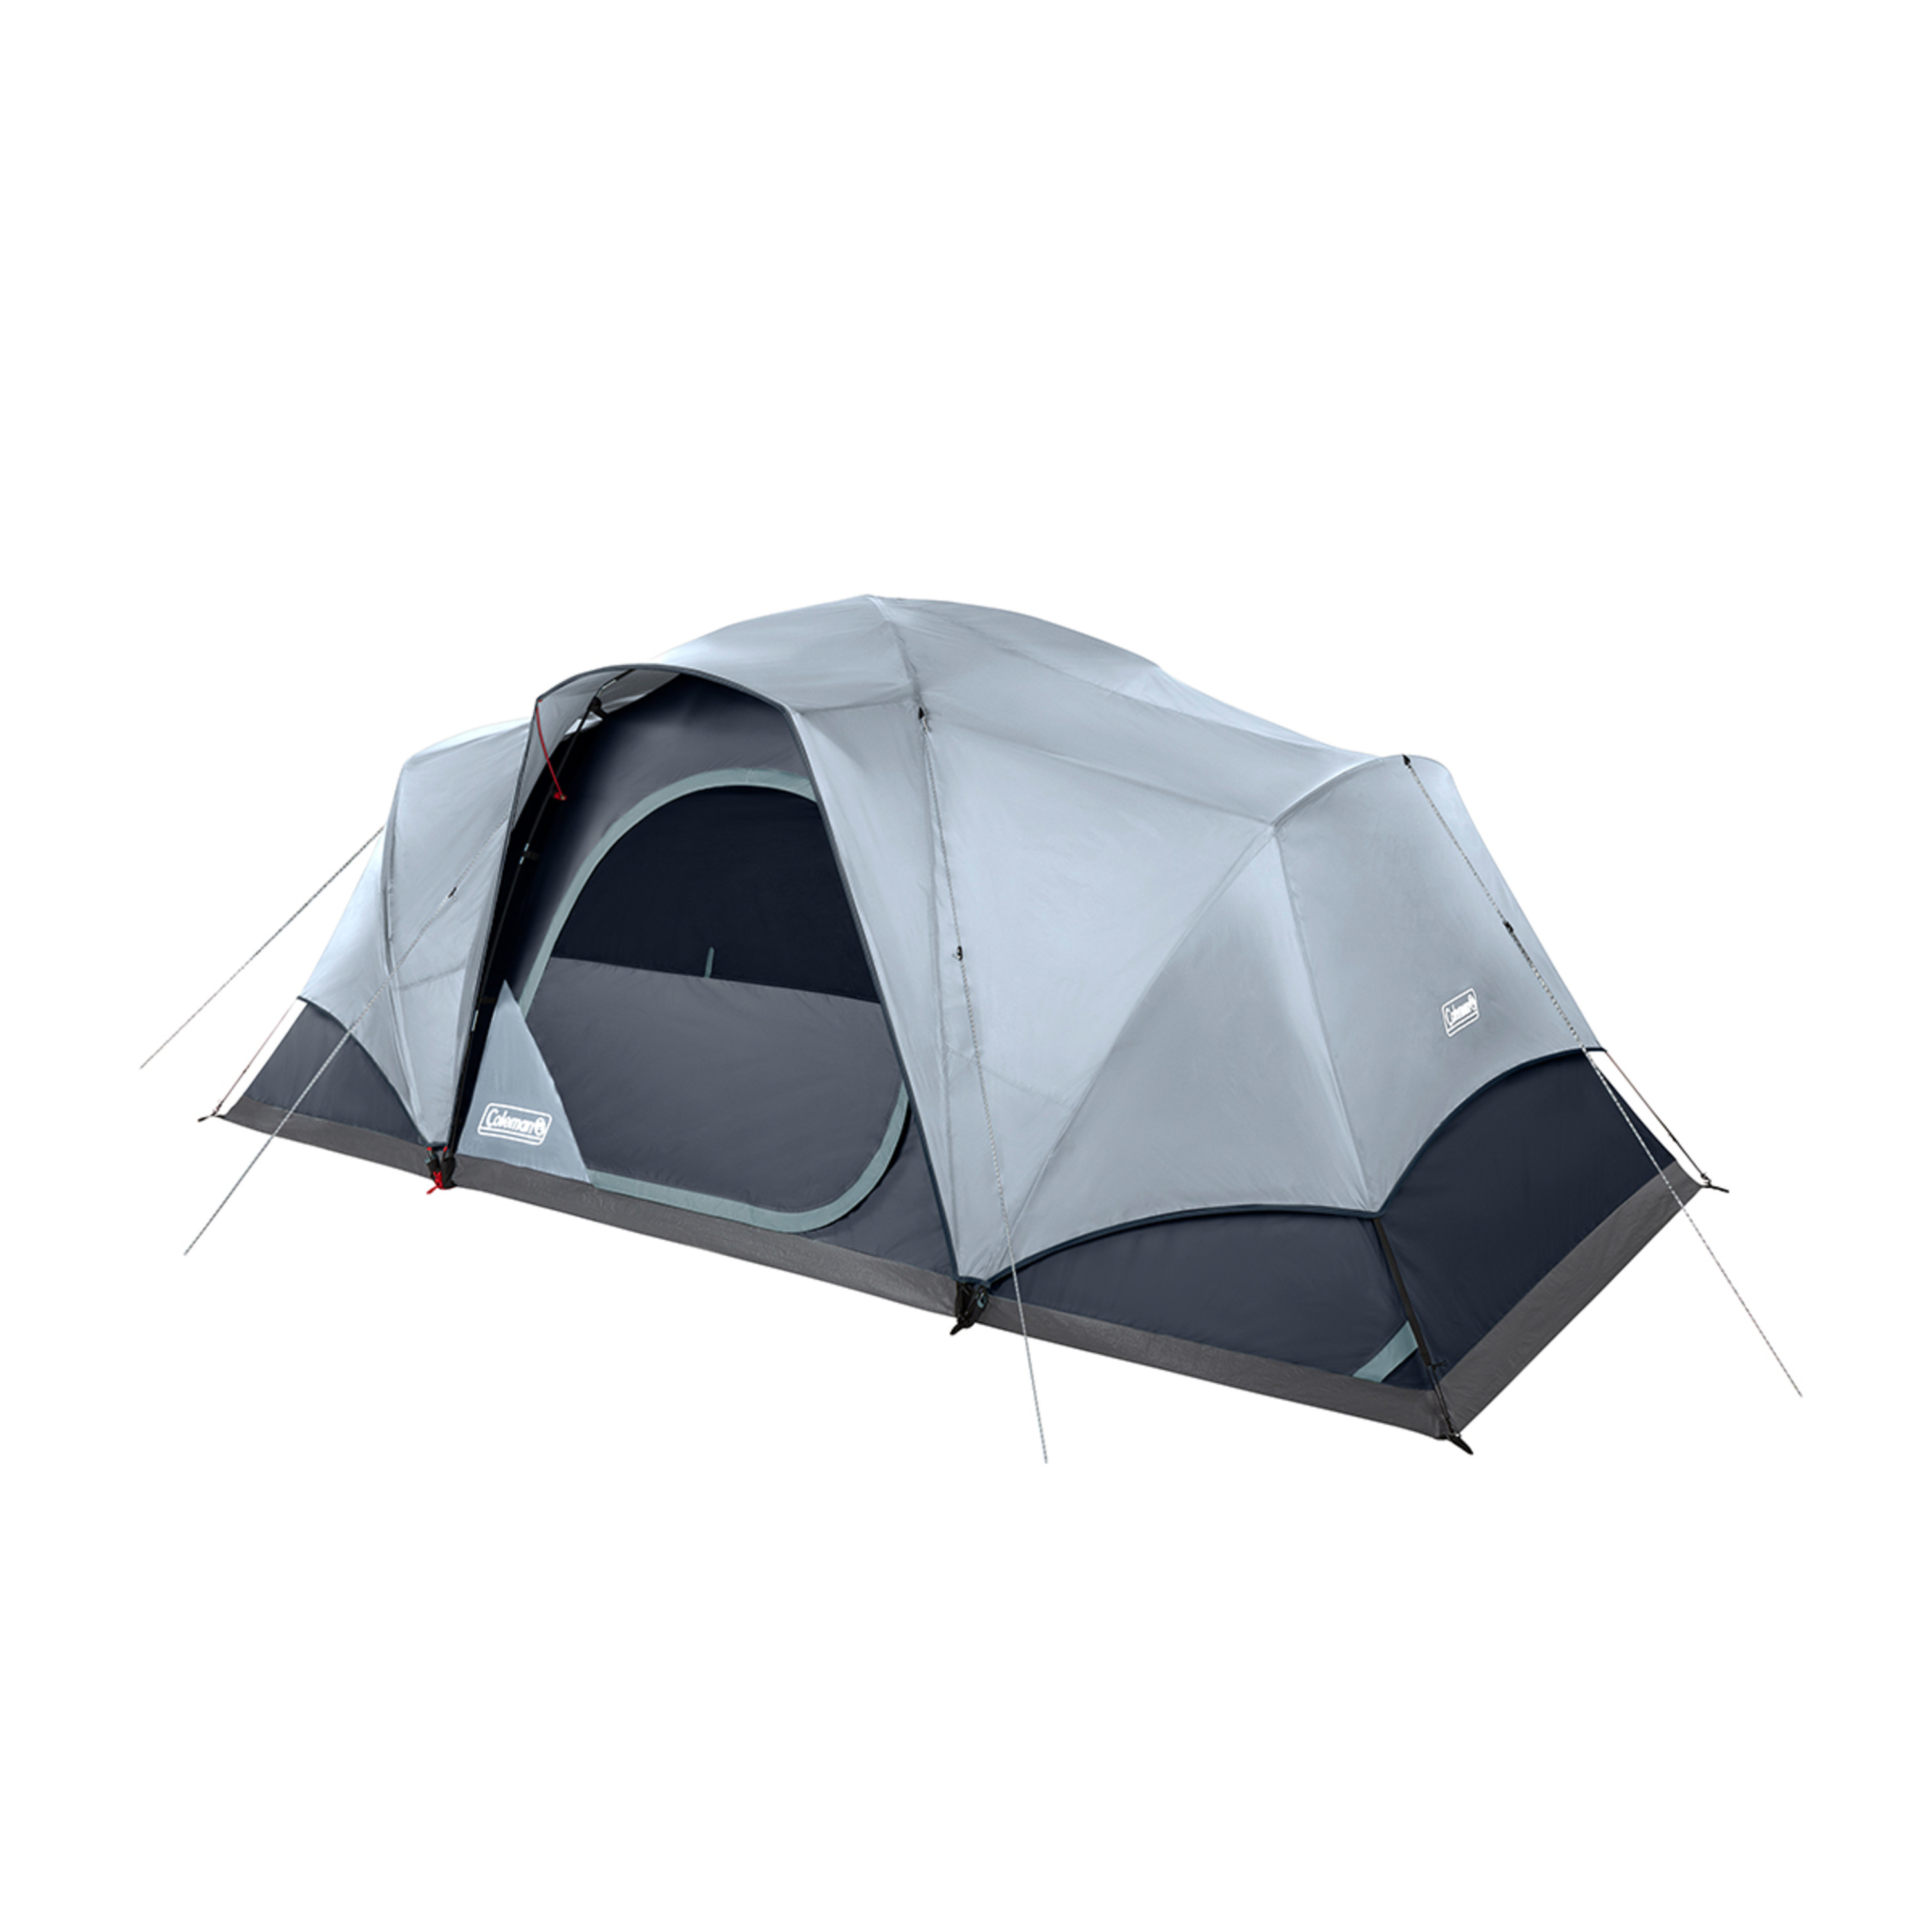 Coleman Skydome XL 8-Person Camp Tent with LED Lighting - image 1 of 8